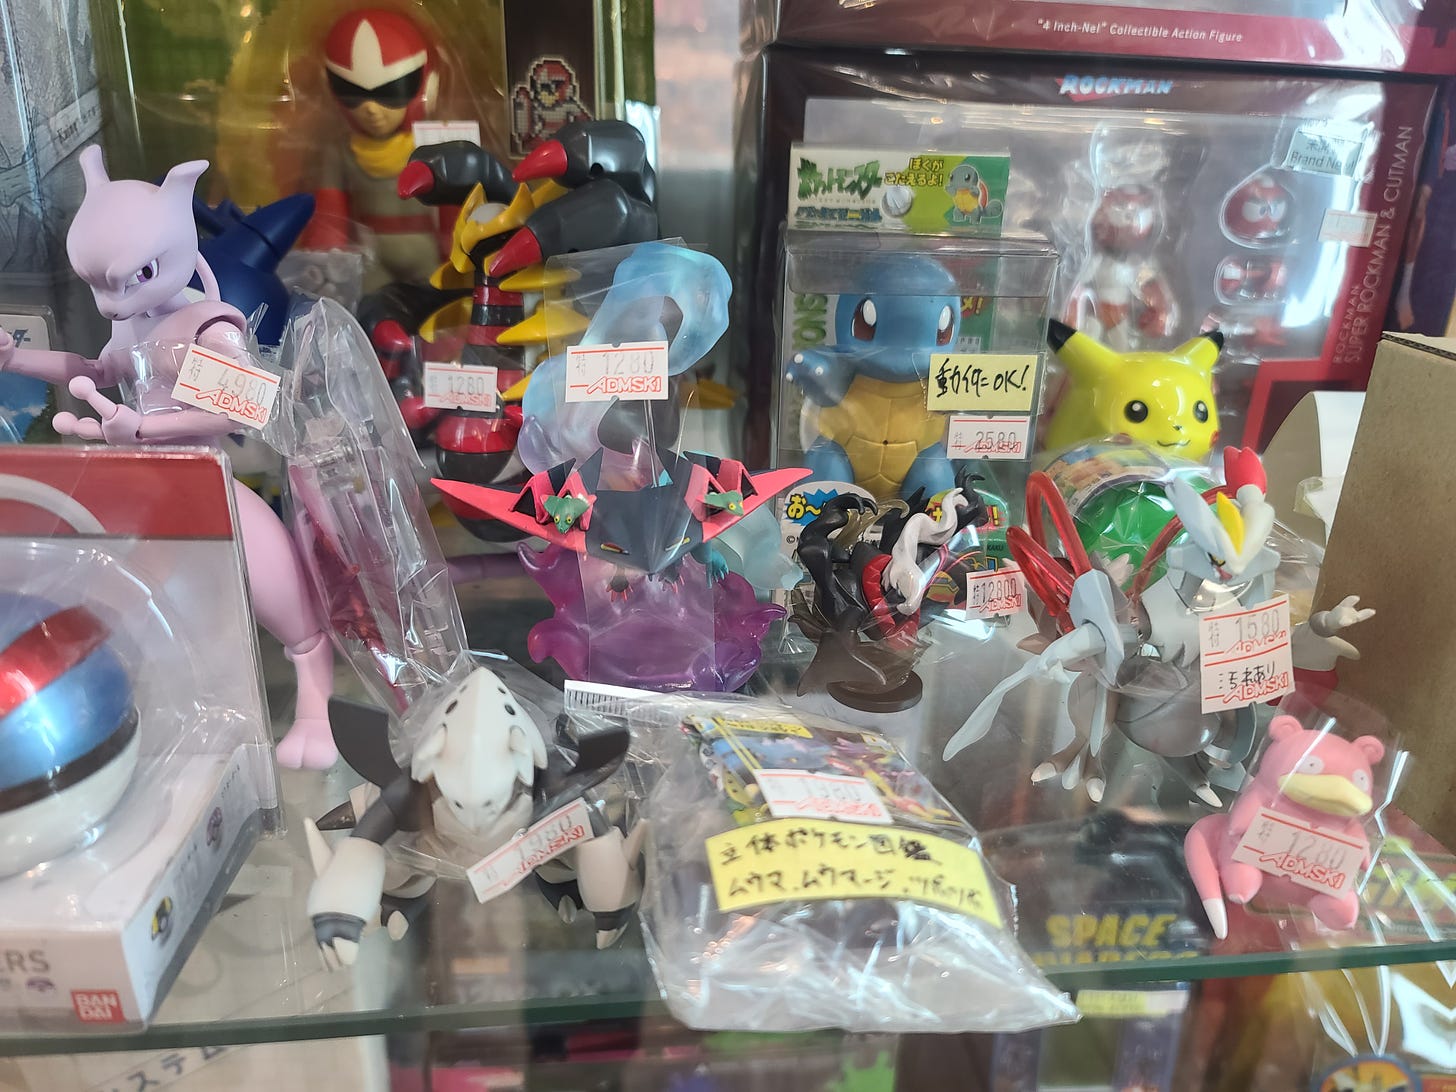 A huge variety of items were on sale at Admski, but Pokémon had a huge presence on these shelves